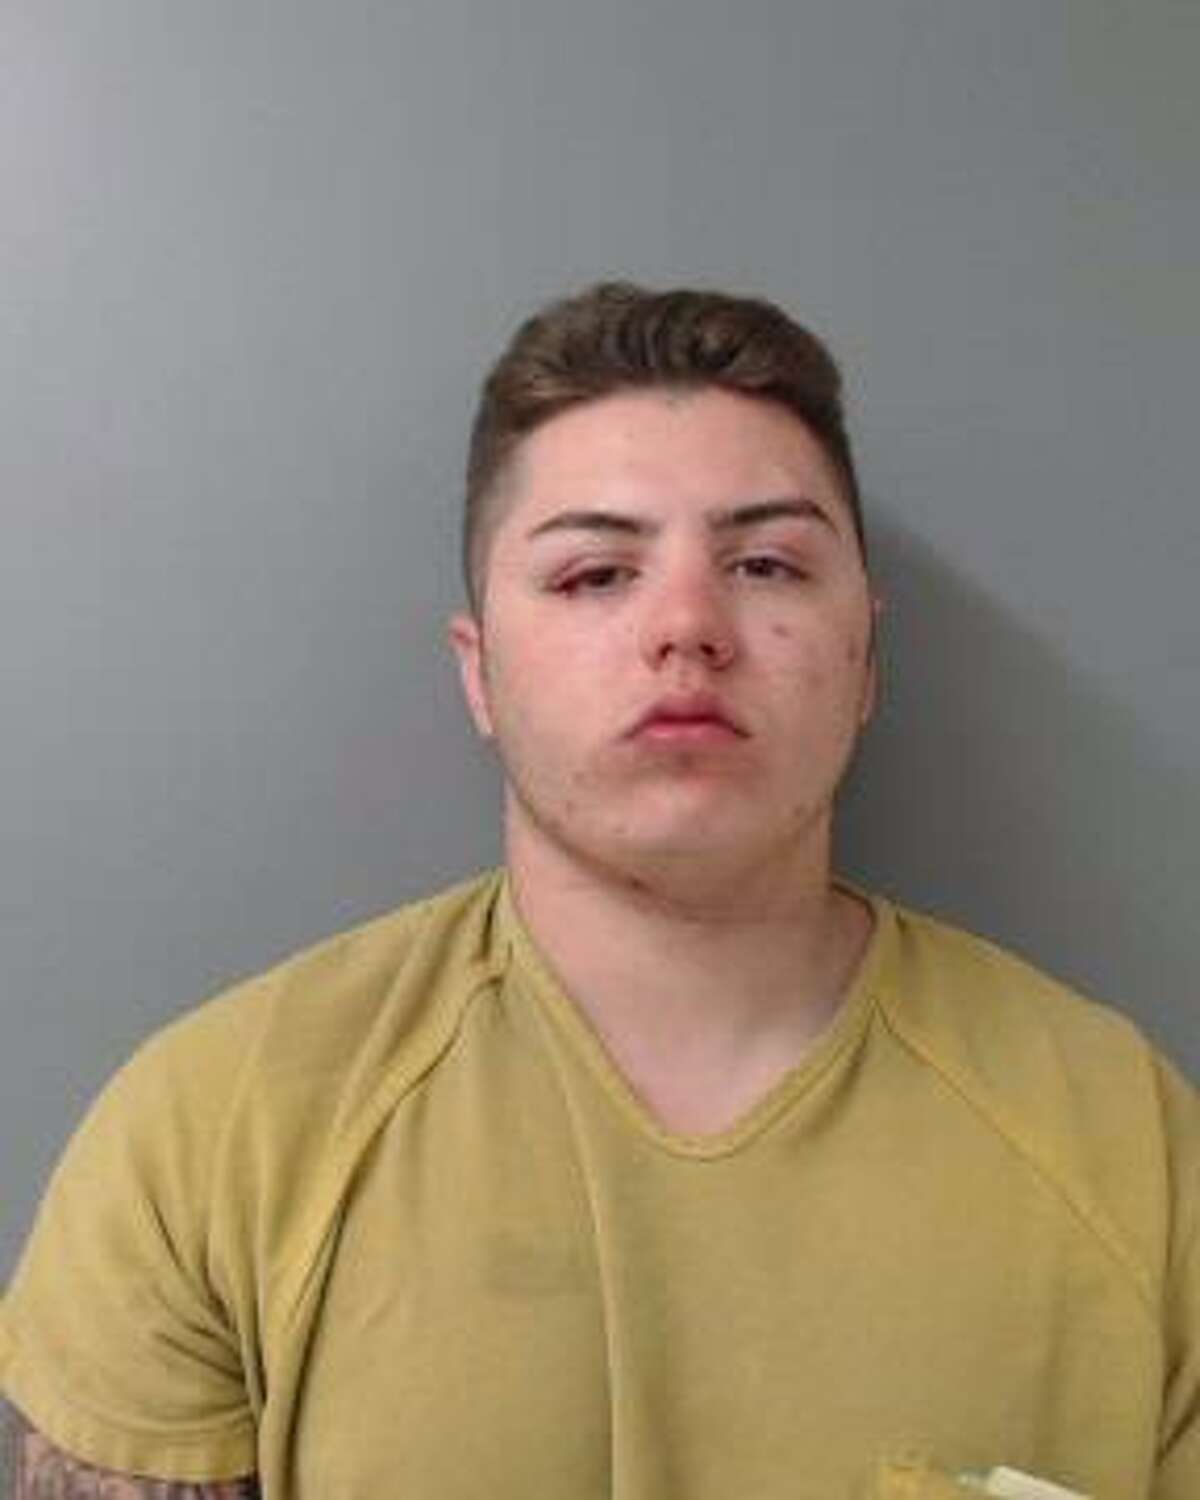 Luis Javier Garza Jr., 20, was arrested for his involvement in an alleged bar fight at Applebee's on May 27, 2022 in Laredo.